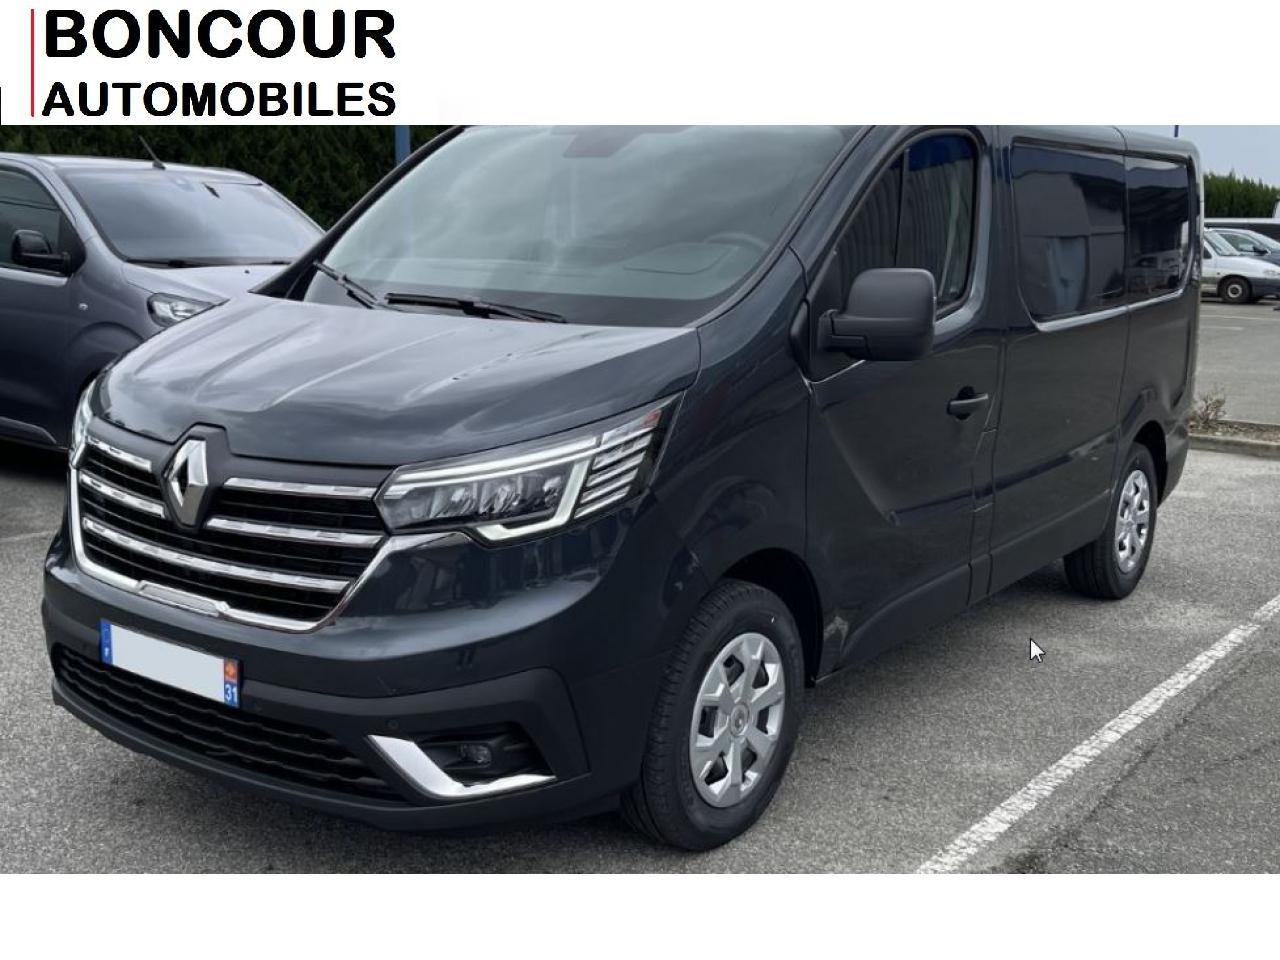 RENAULT-TRAFIC-III(3) L1H1 2800 2.0 BluedCi 150ch Grand Confort